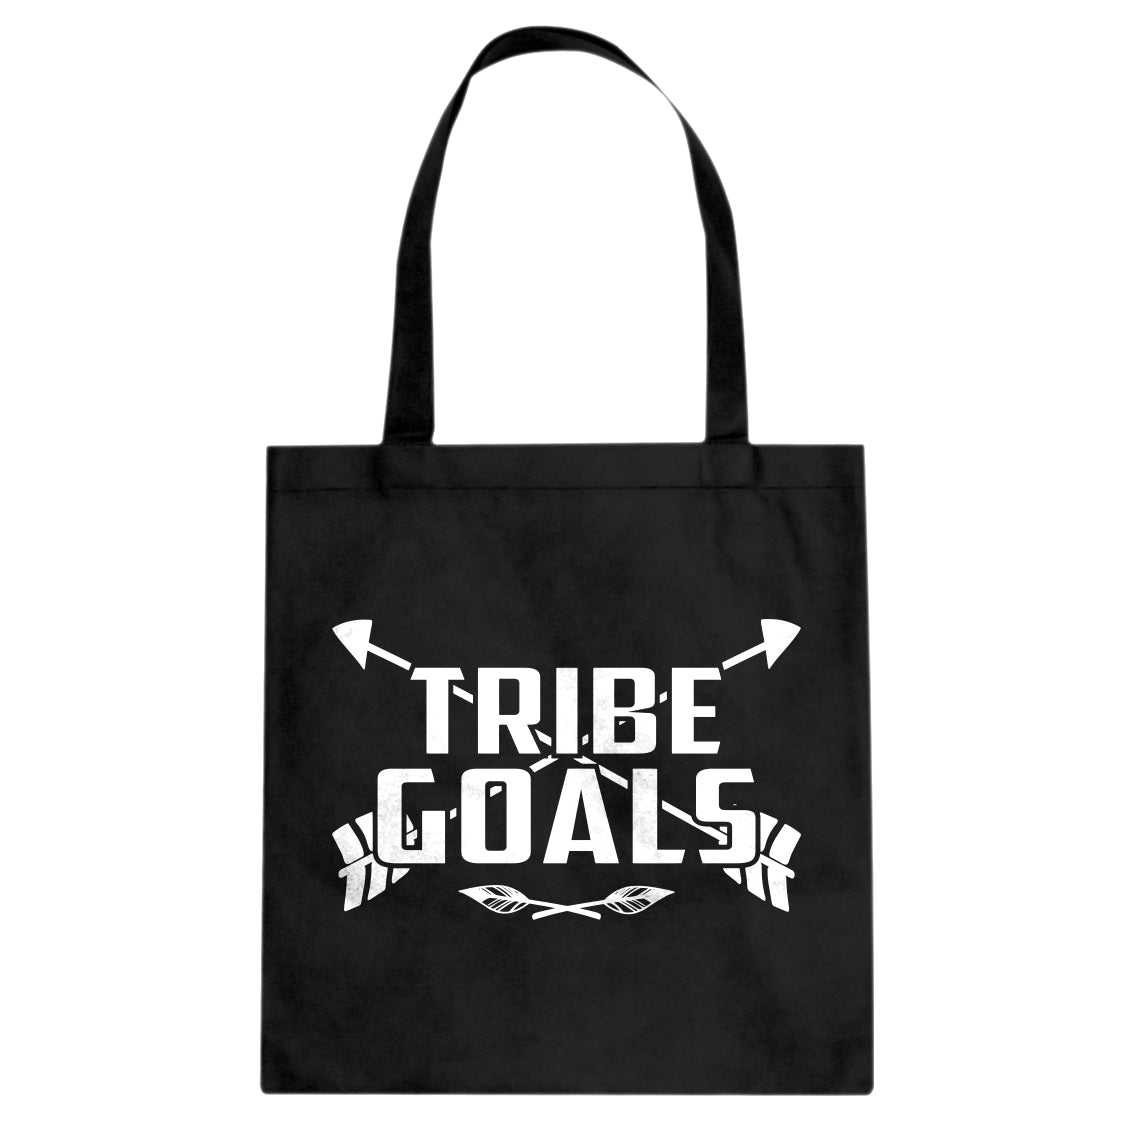 Tote Tribe Goals Canvas Tote Bag